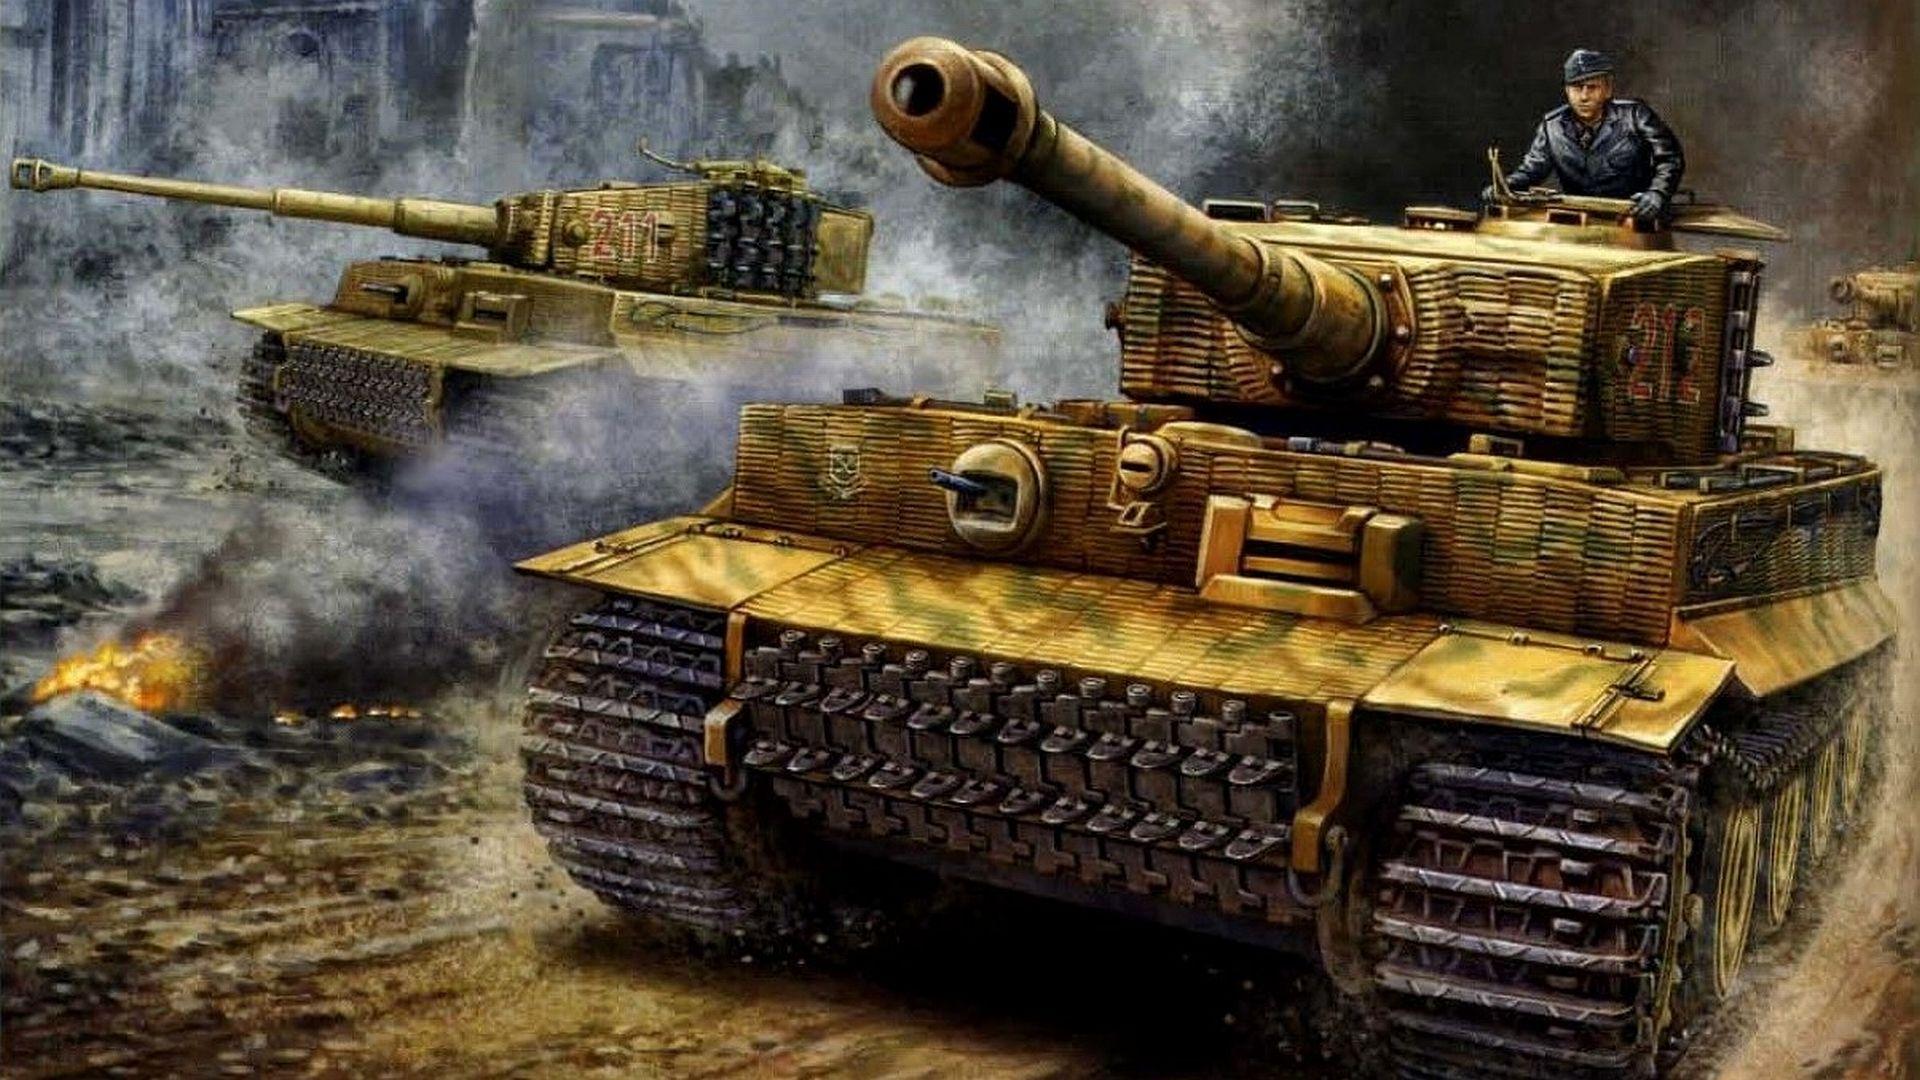 Tiger Tank Wallpaper for iPhone